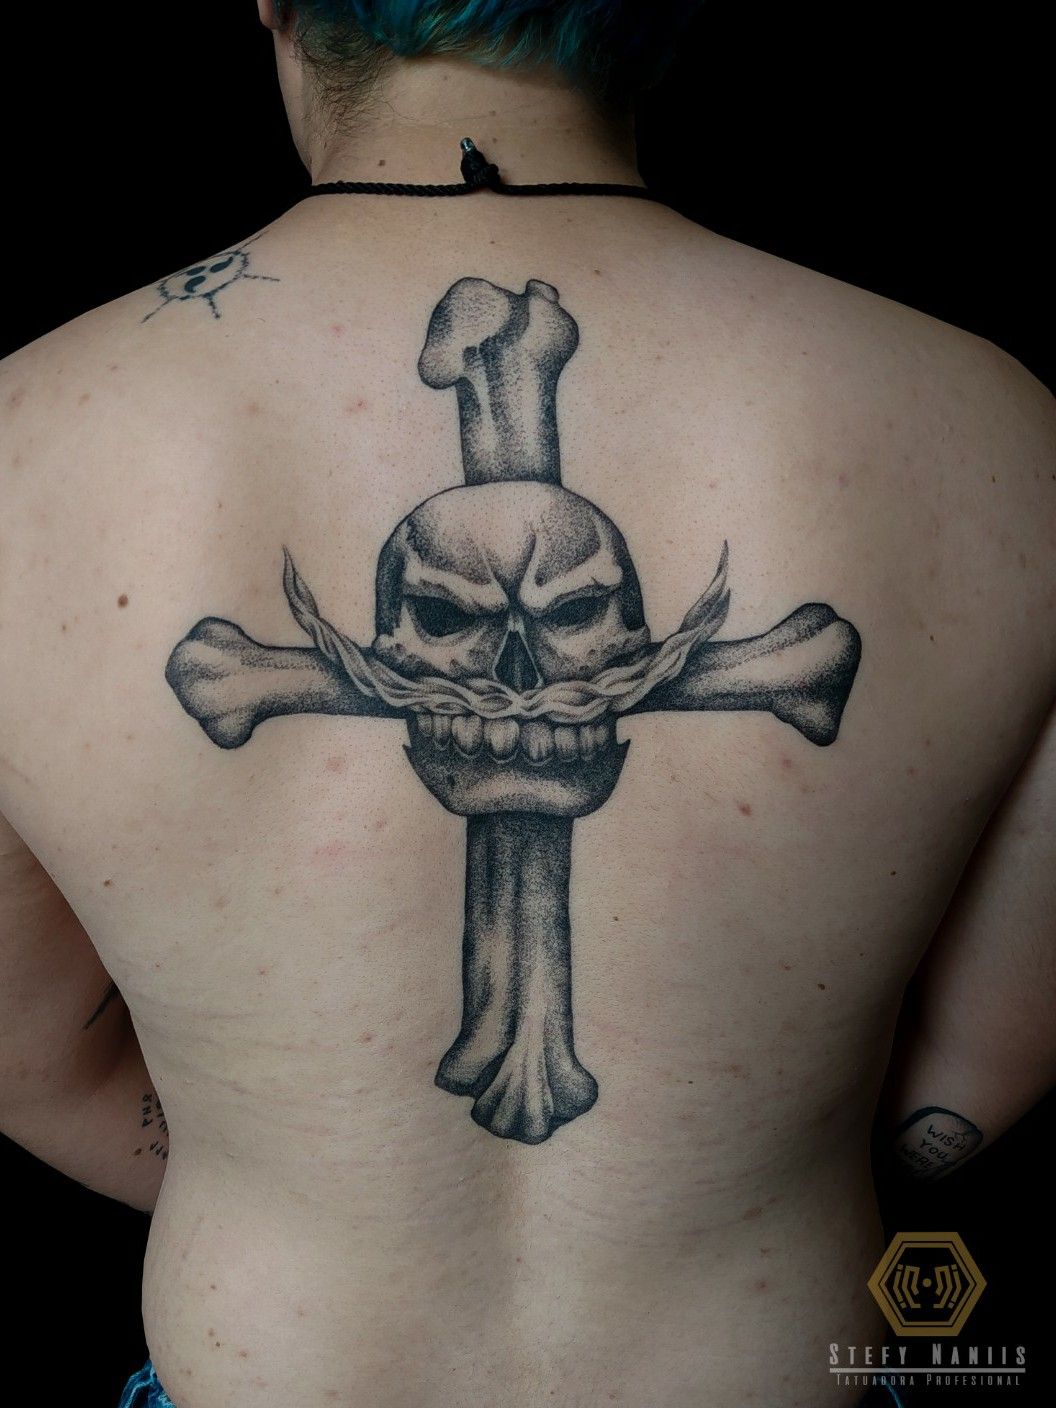 Flame of a Pirates Pride Portgas D Aces Tattoo of the Whitebeard  Pirates  Sailing Dreams Scholar